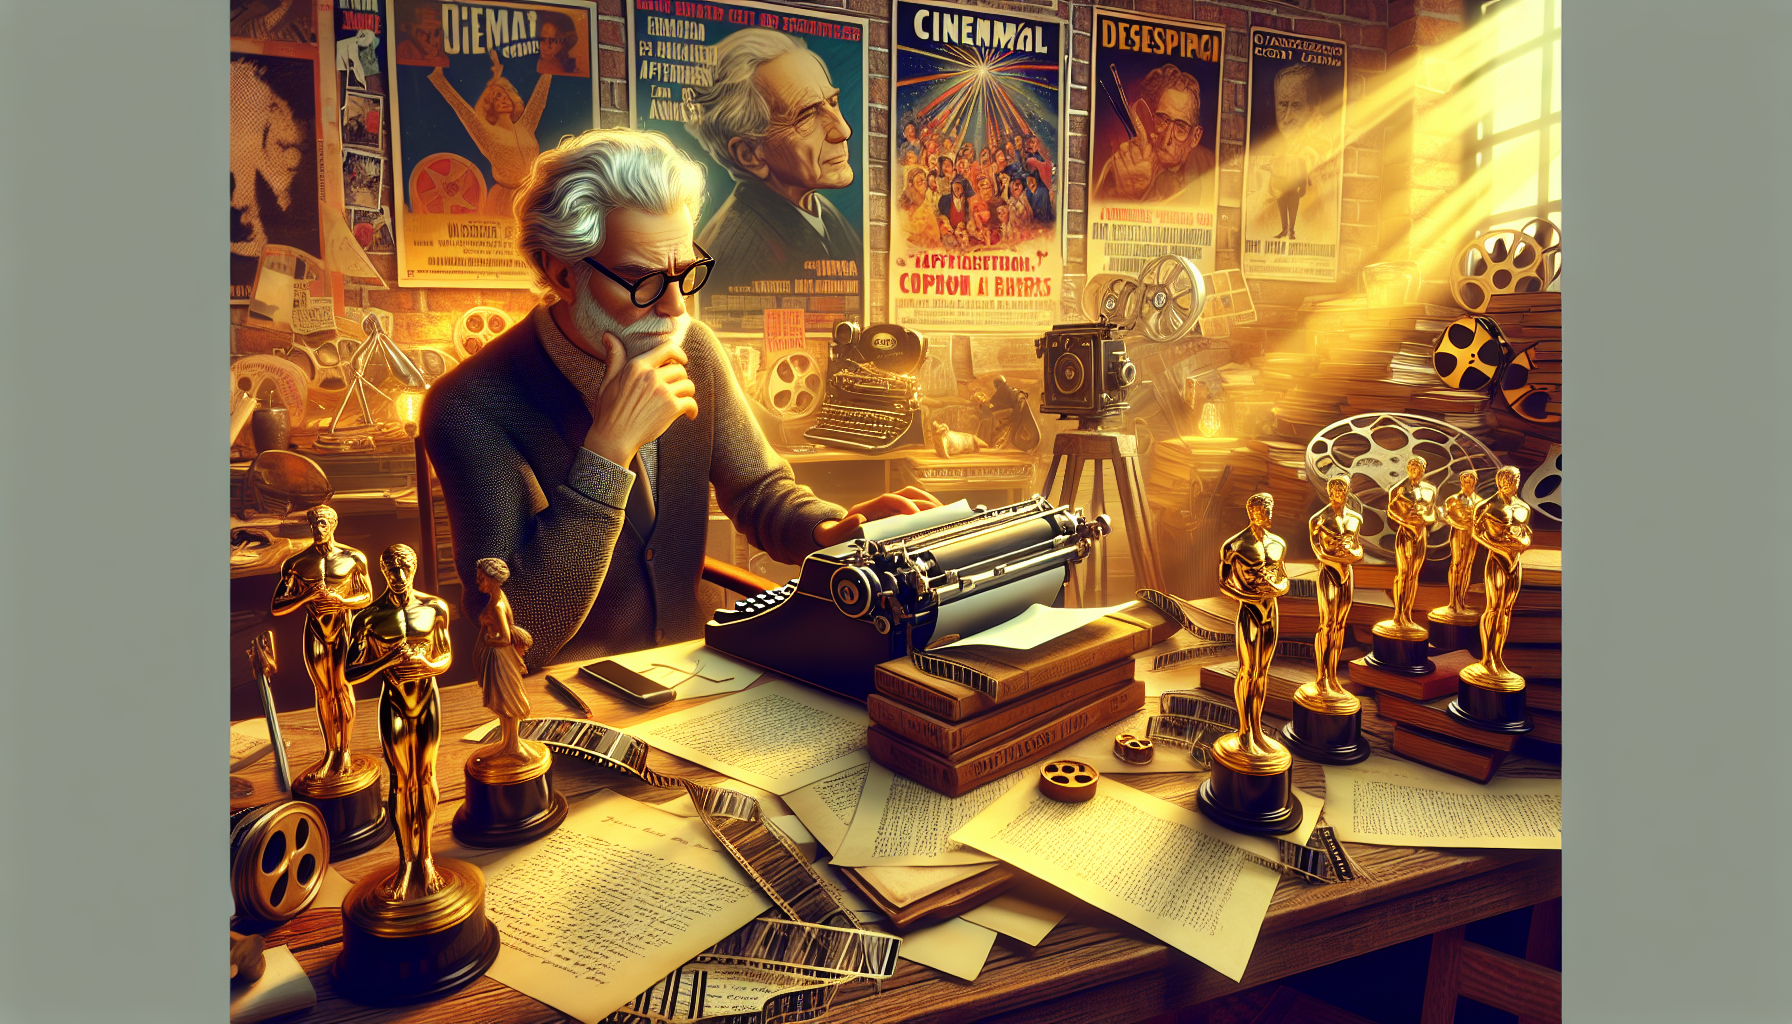 An atmospheric and immersive artist's studio filled with film posters and scripts, where an elderly man resembling Eric Roth thoughtfully contemplates a typewriter surrounded by Oscars and iconic film